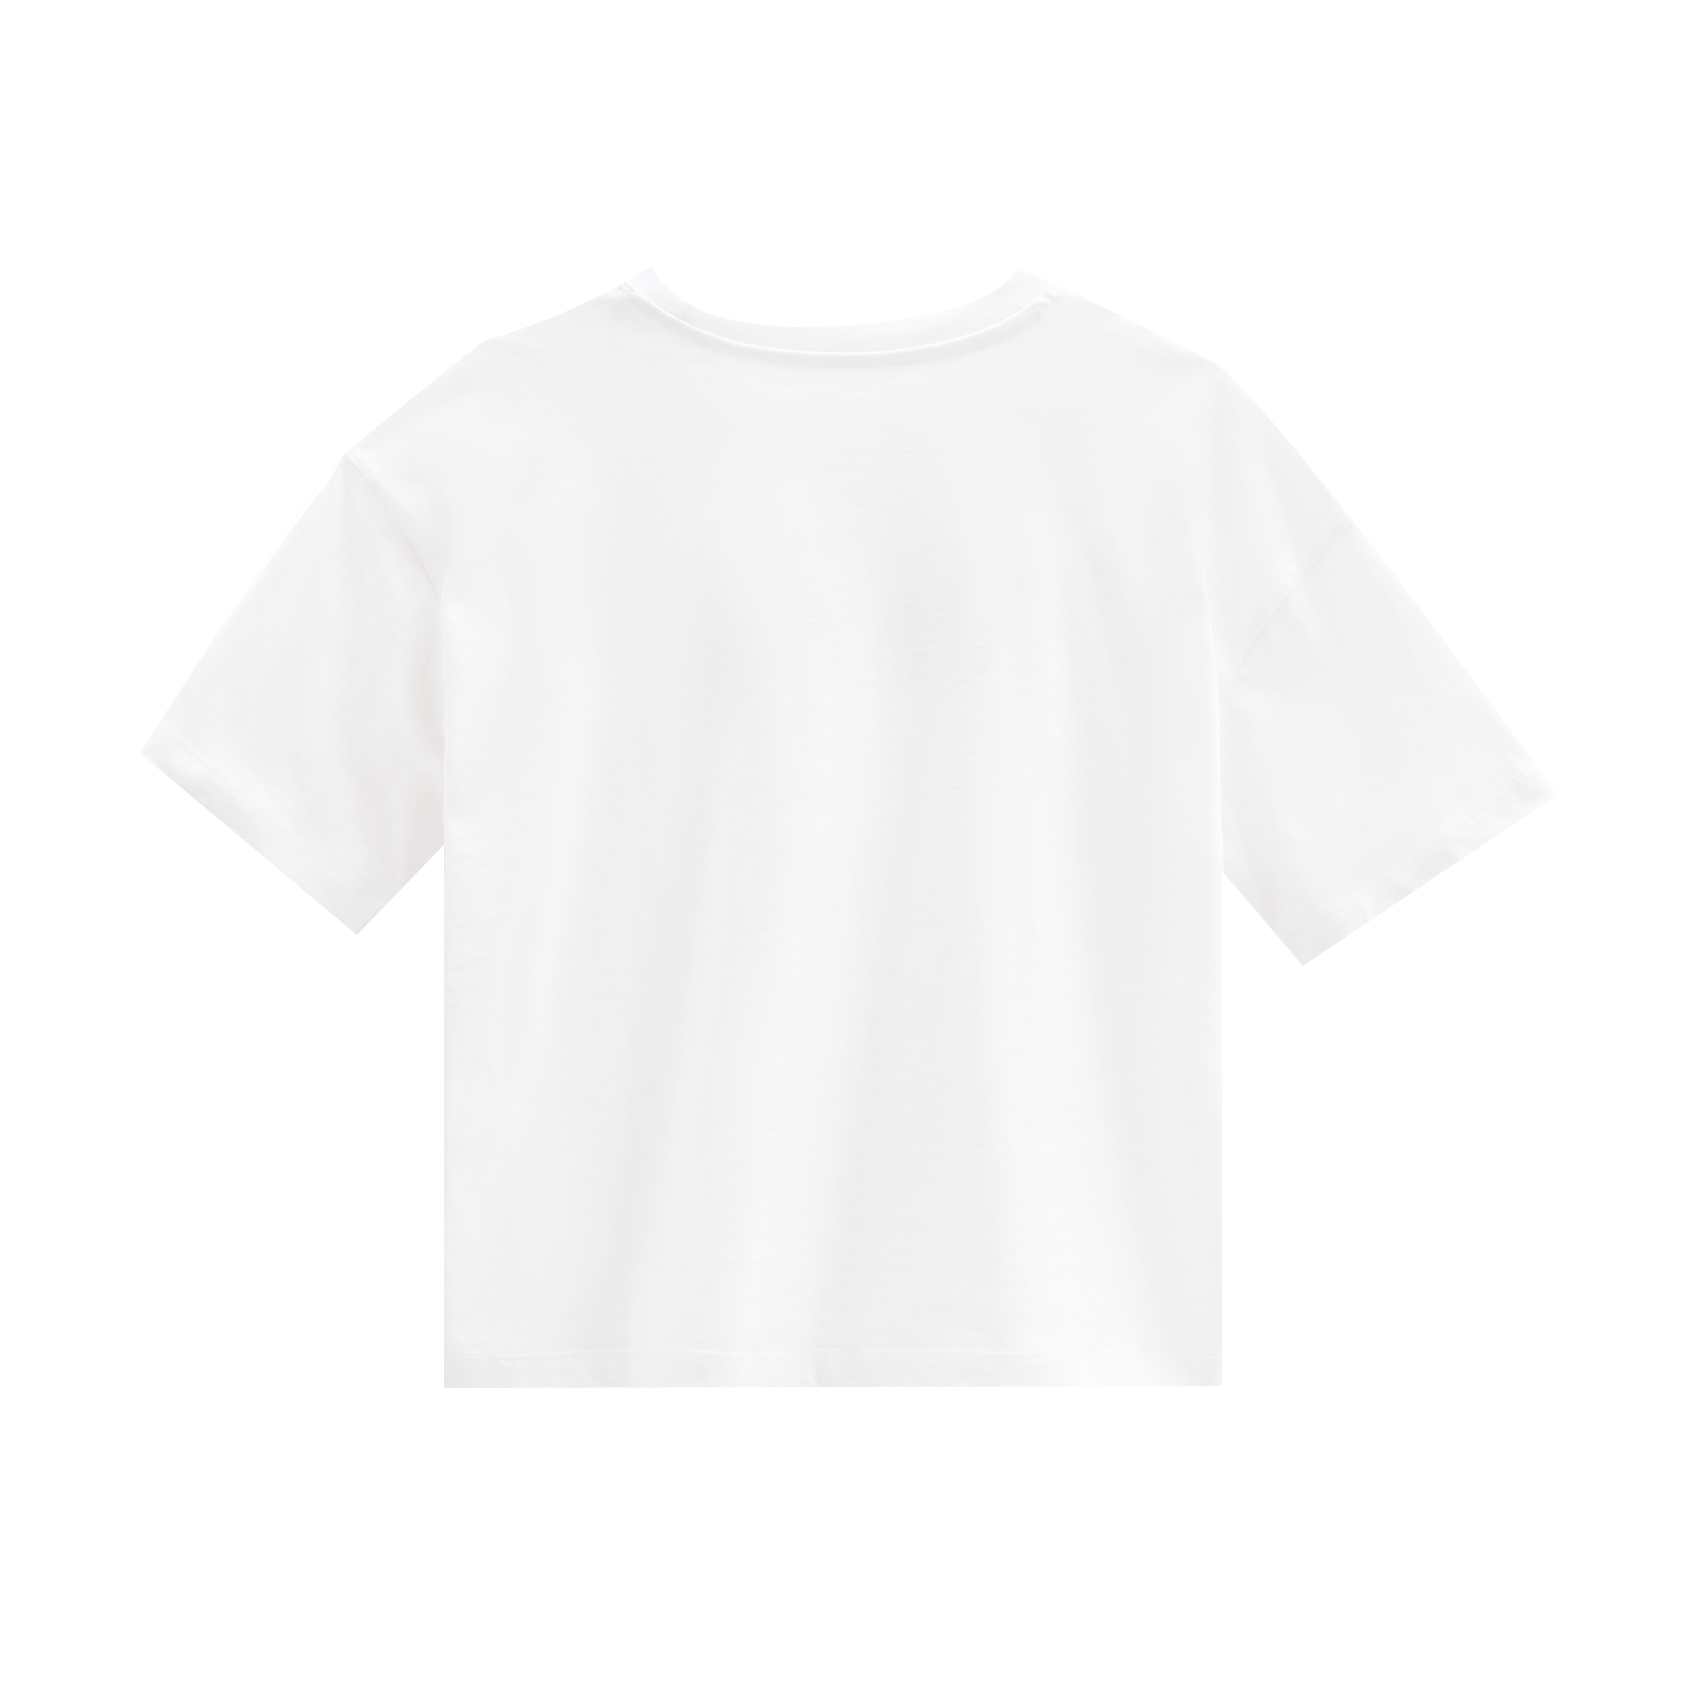 Relaxed Boxy Tee - White.